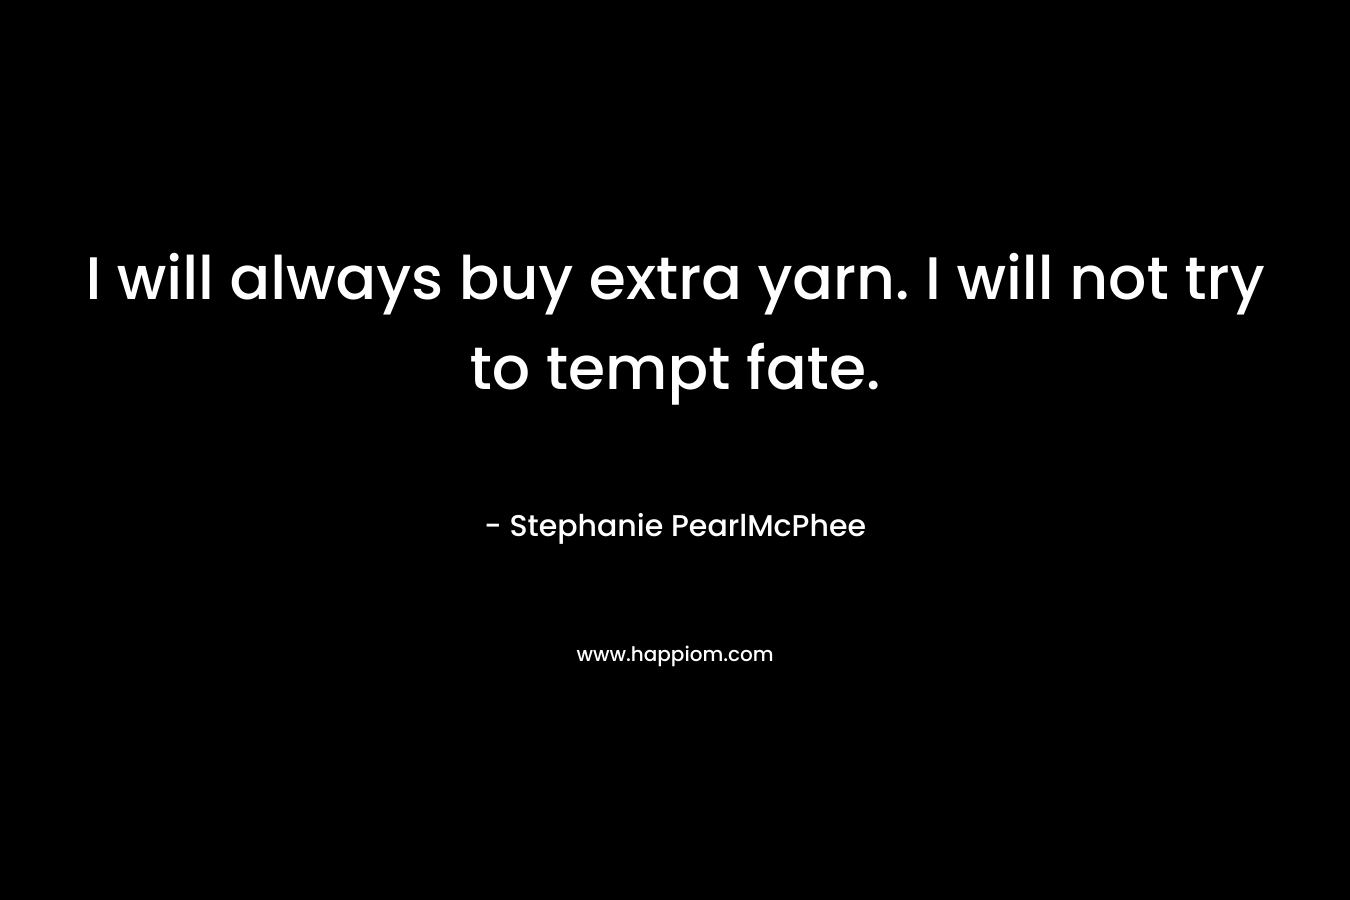 I will always buy extra yarn. I will not try to tempt fate.